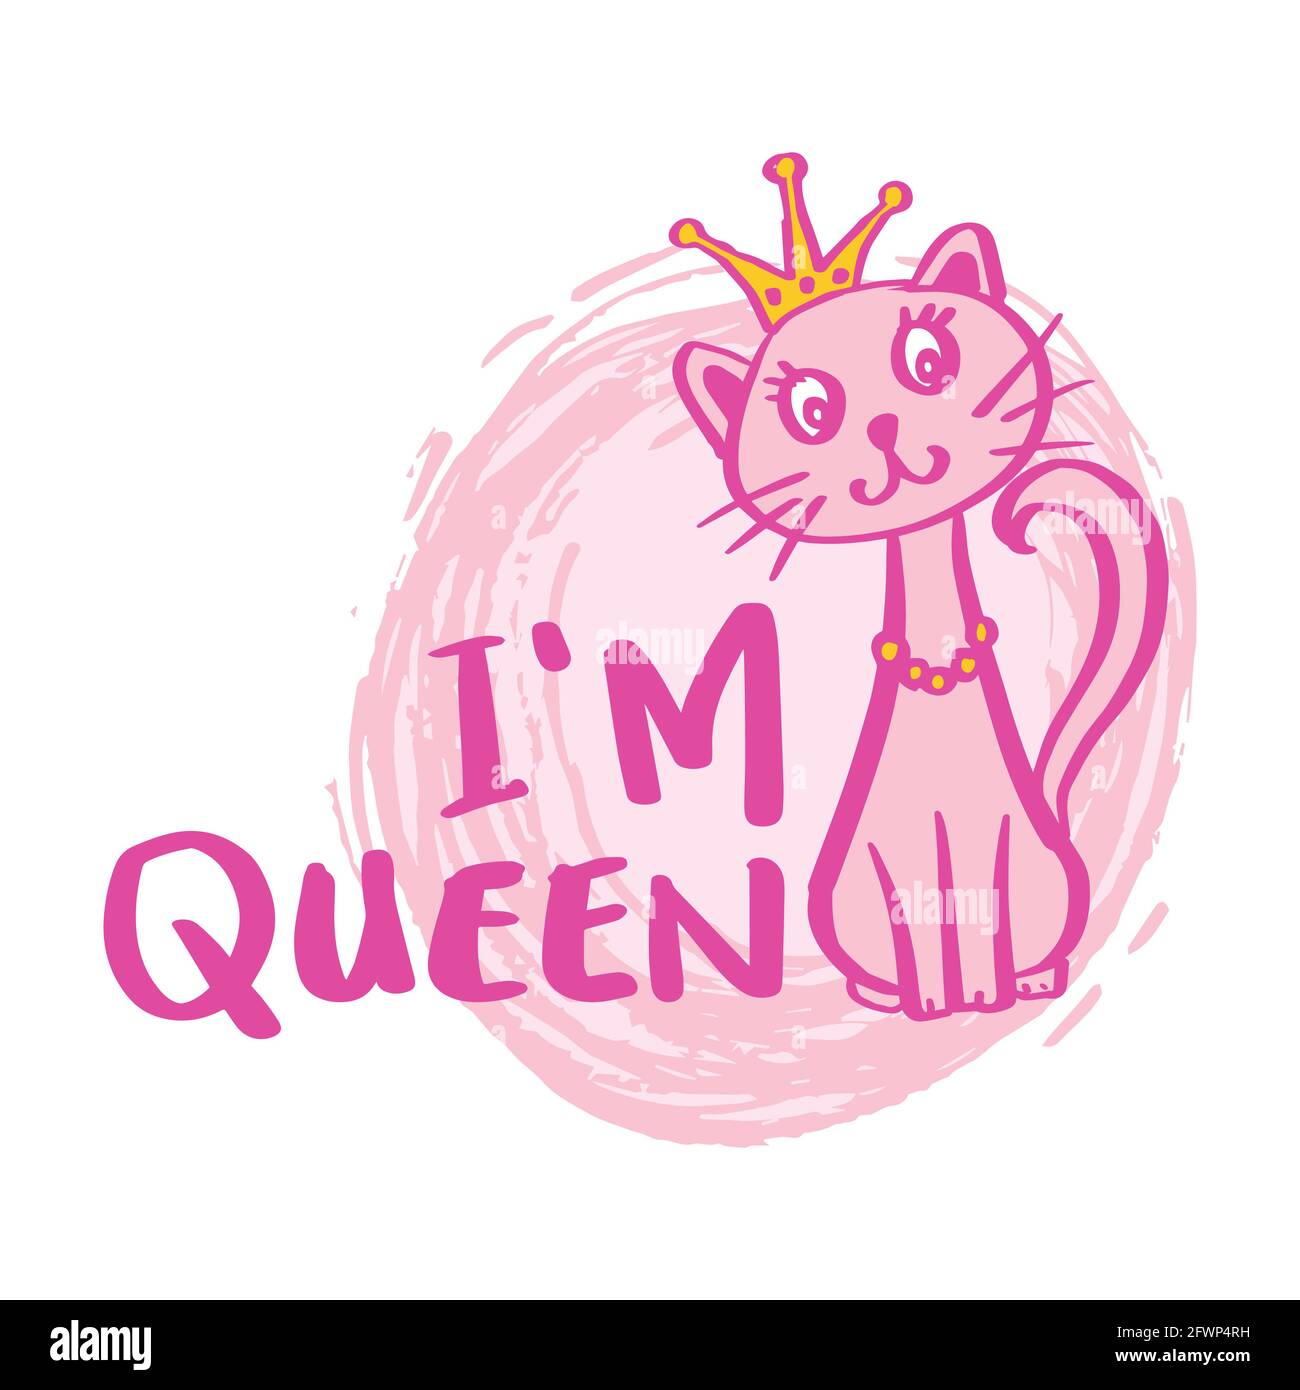 I'm Queen hand lettering. Fashion print cute cat  with crown. Stock Photo